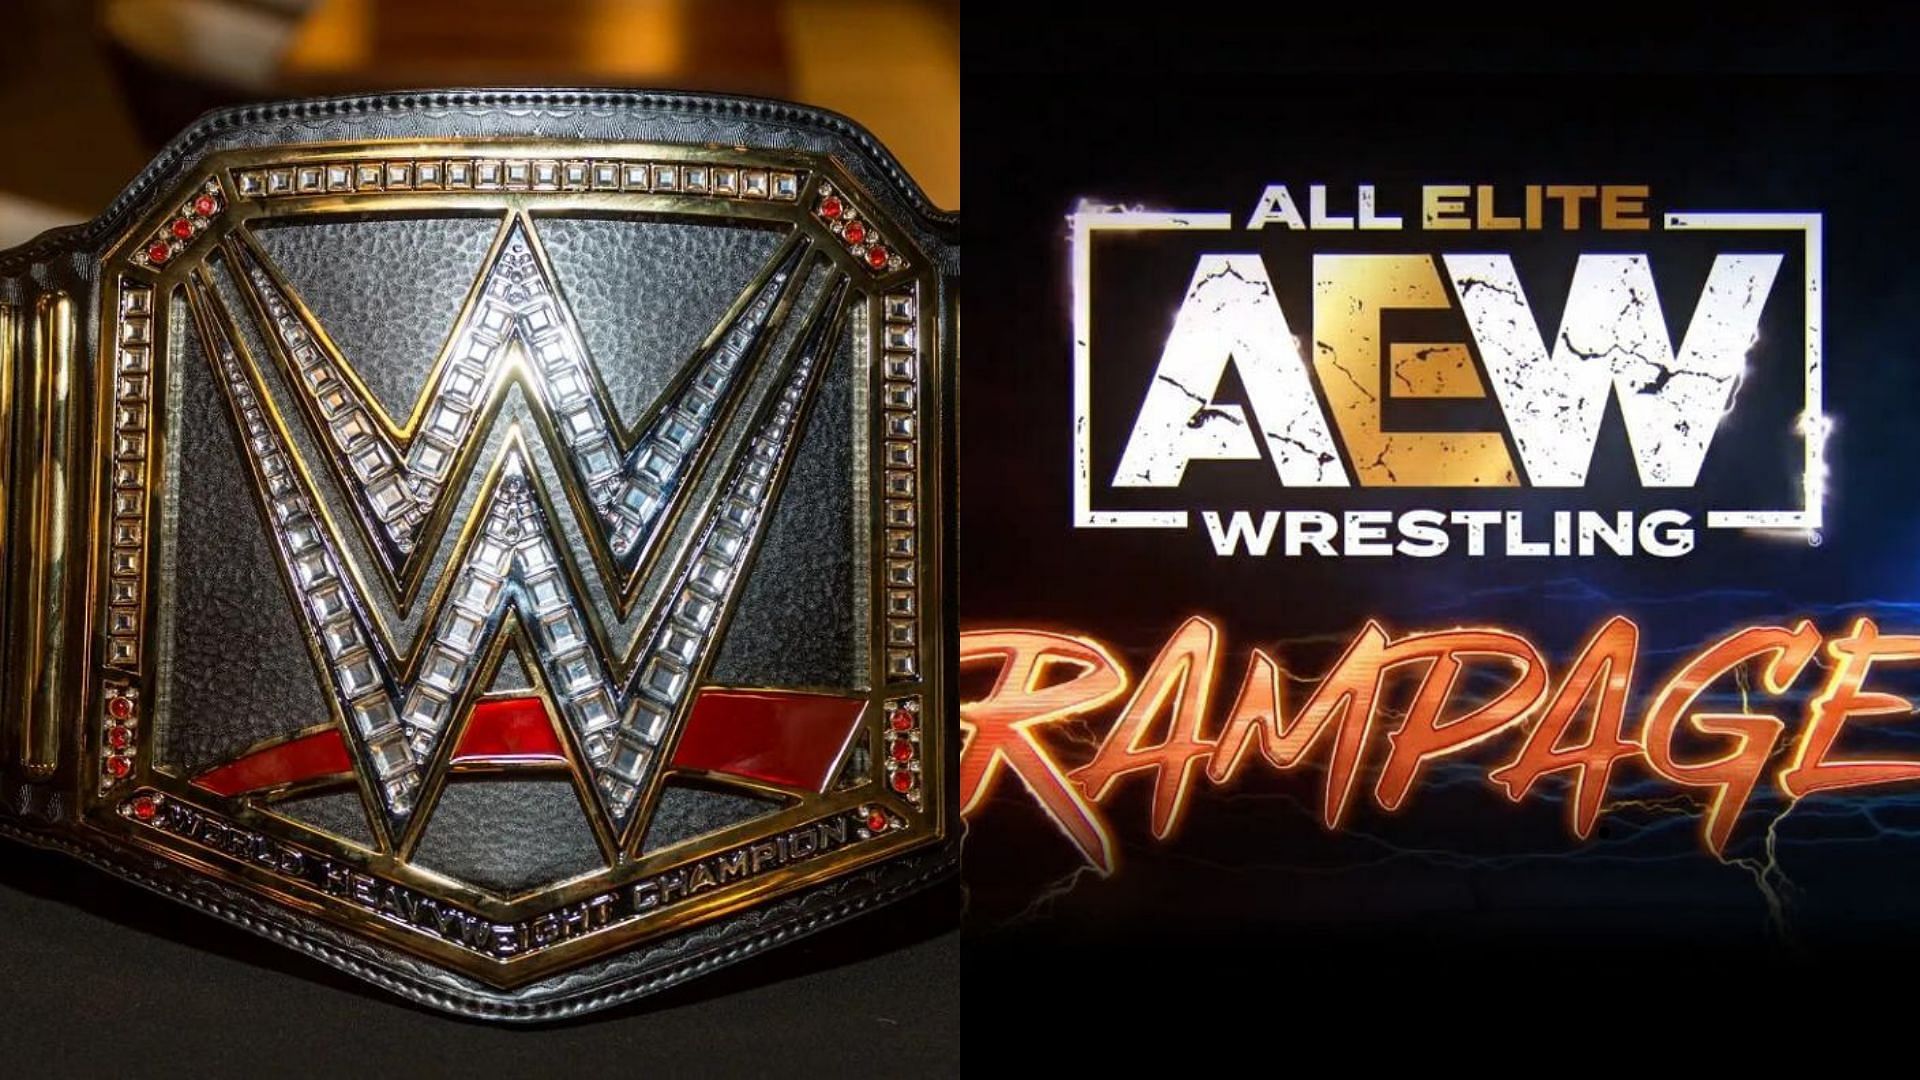 AEW Rampage is the weekly Friday show of All Elite Wrestling